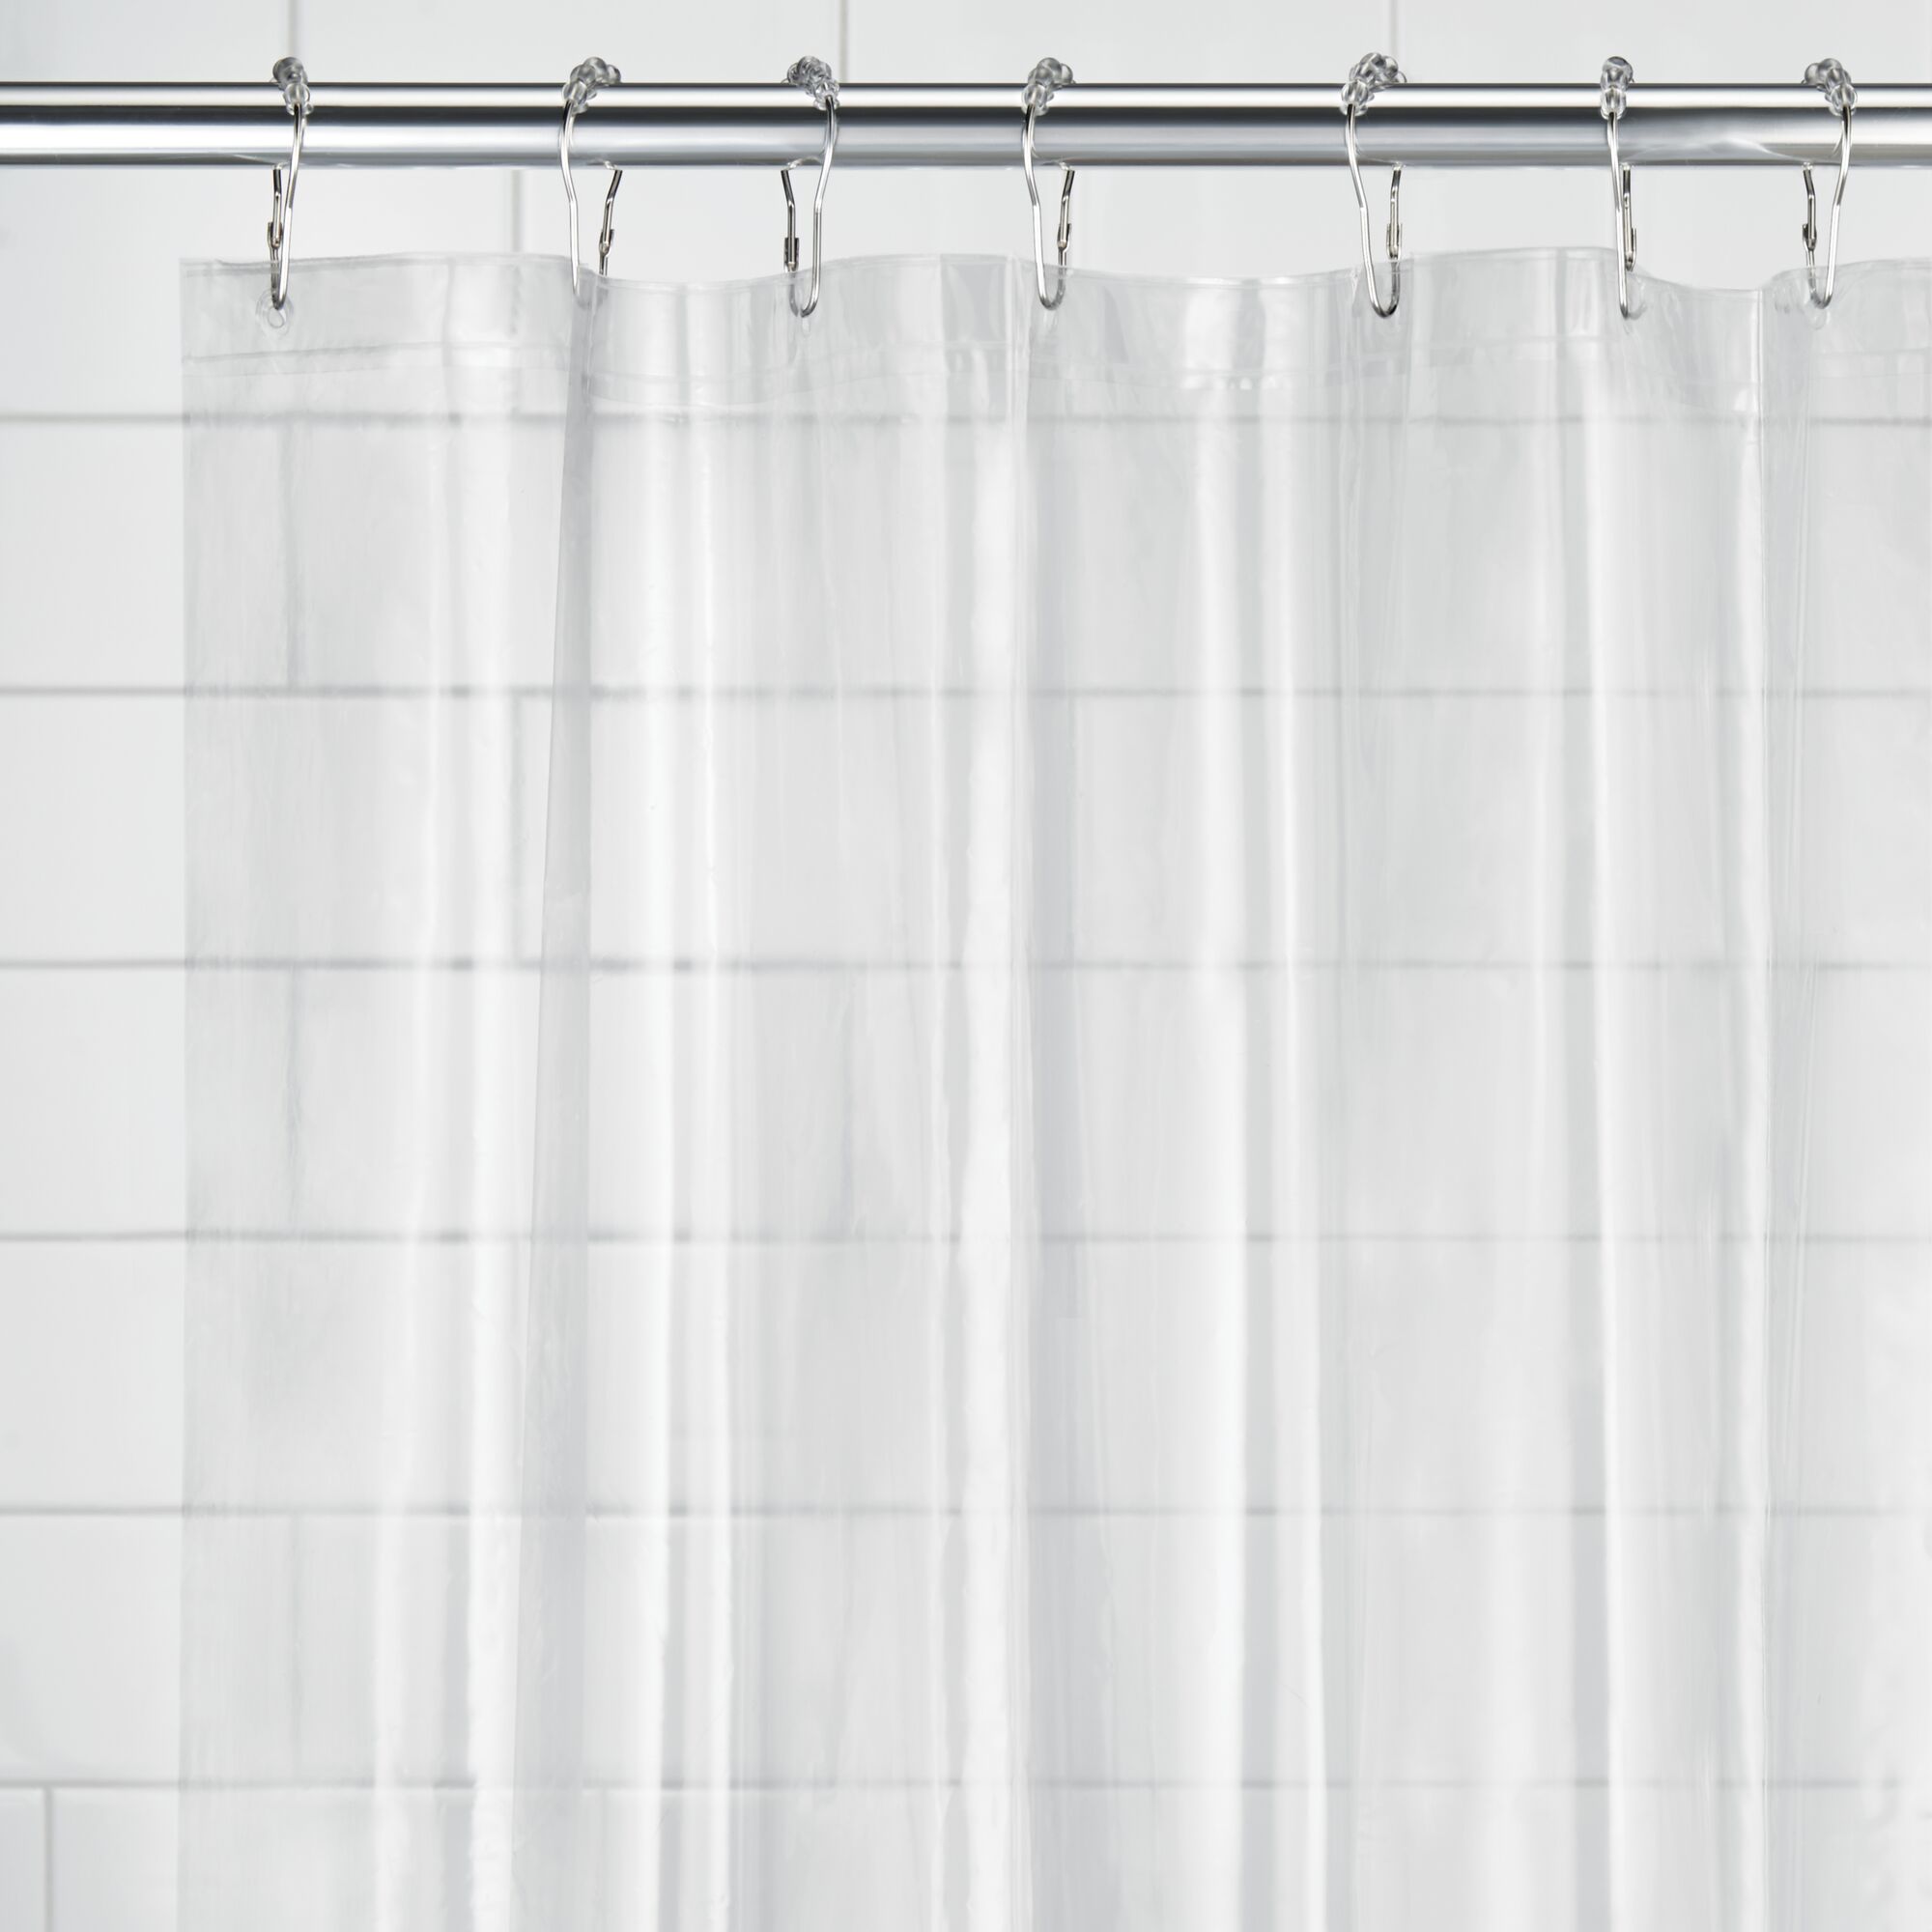 iDesign Clear PVC-Free Mildew Resistant Stall Shower Curtain Liner, 54" x 78" - image 2 of 8